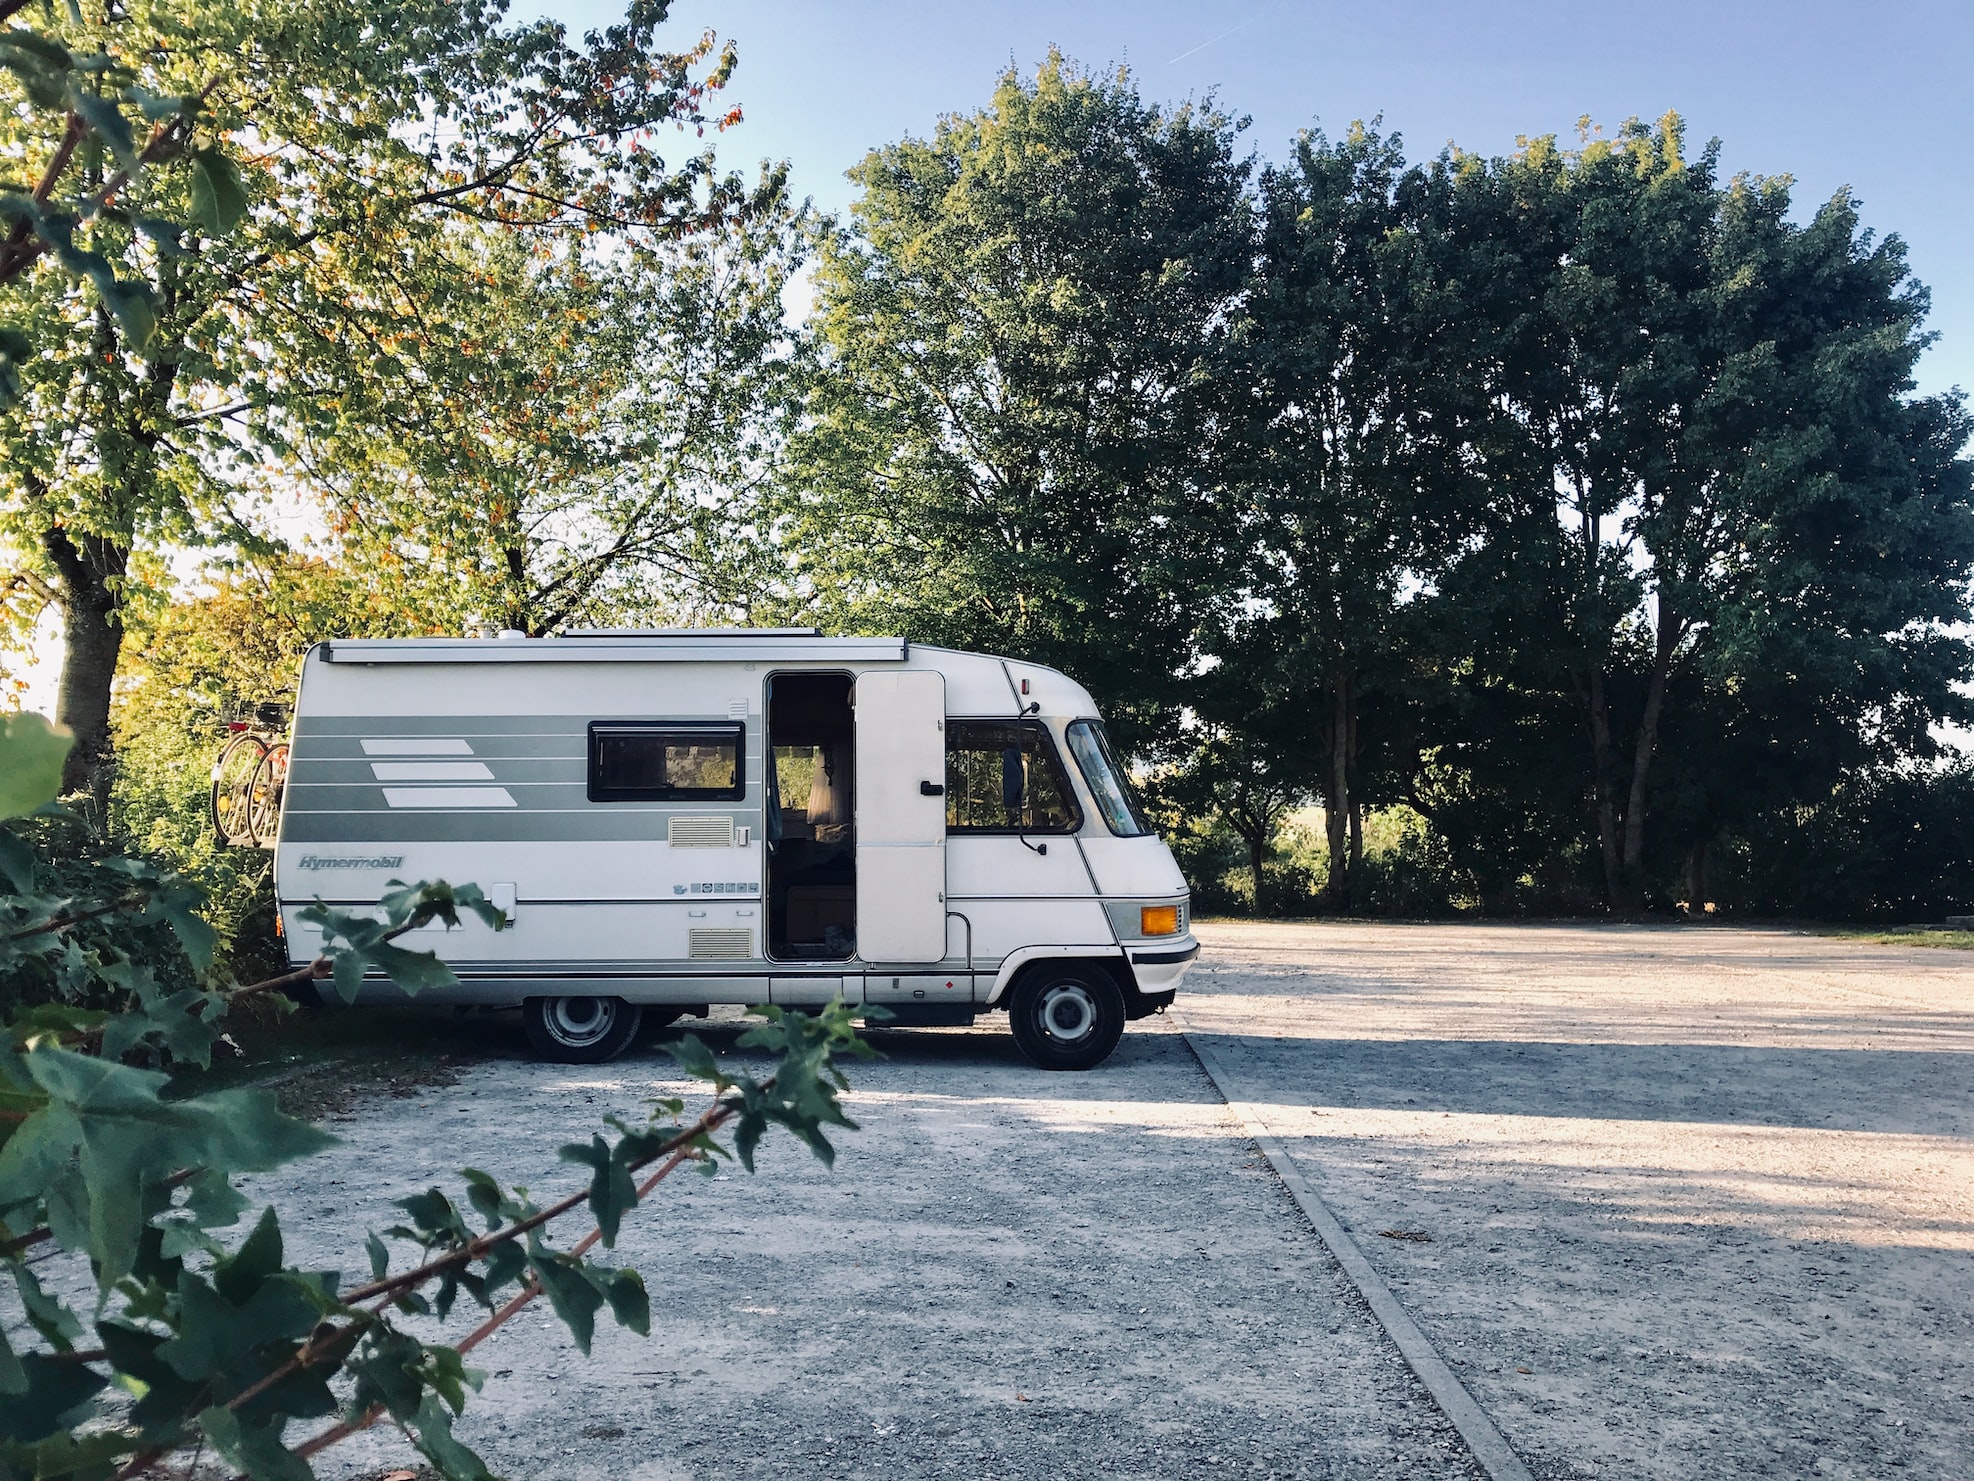 Can You Get a Personal Loan for an RV?